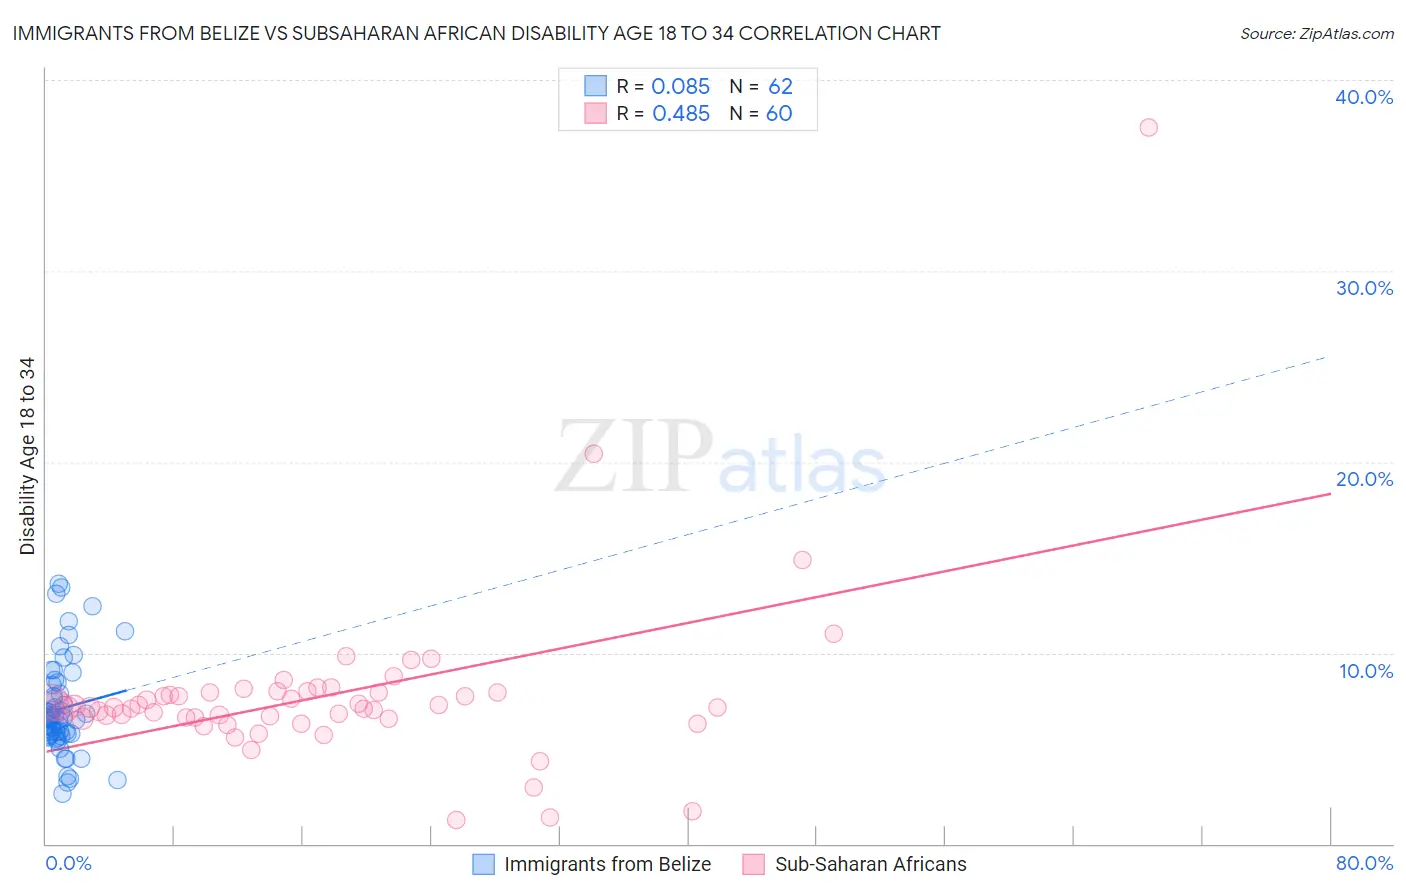 Immigrants from Belize vs Subsaharan African Disability Age 18 to 34